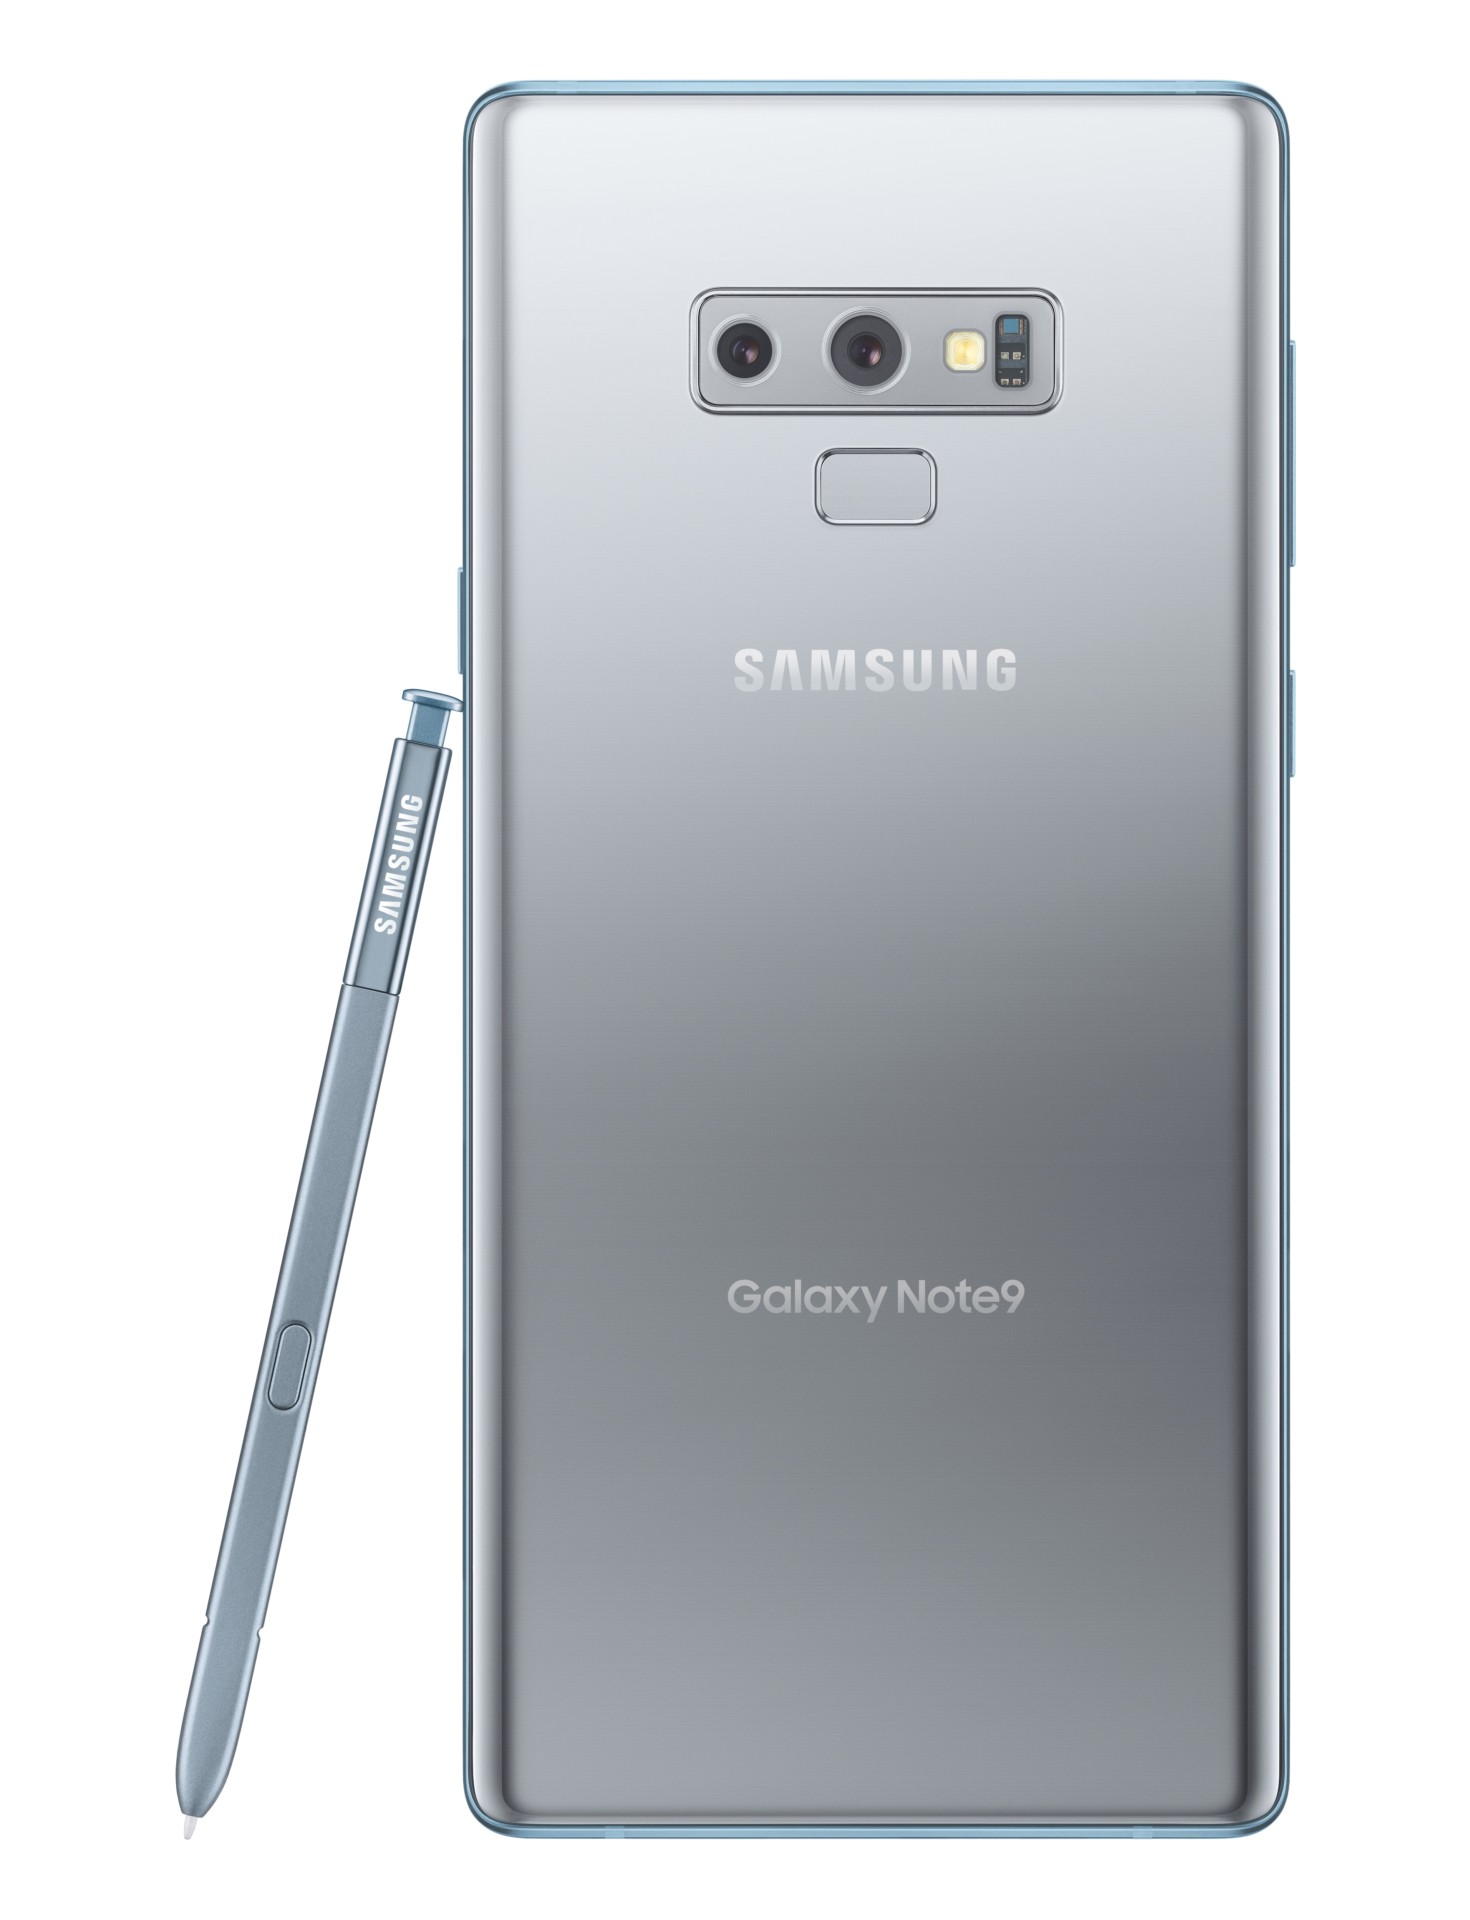 Press images of the Samsung Galaxy Note 9 Cloud Silver edition.